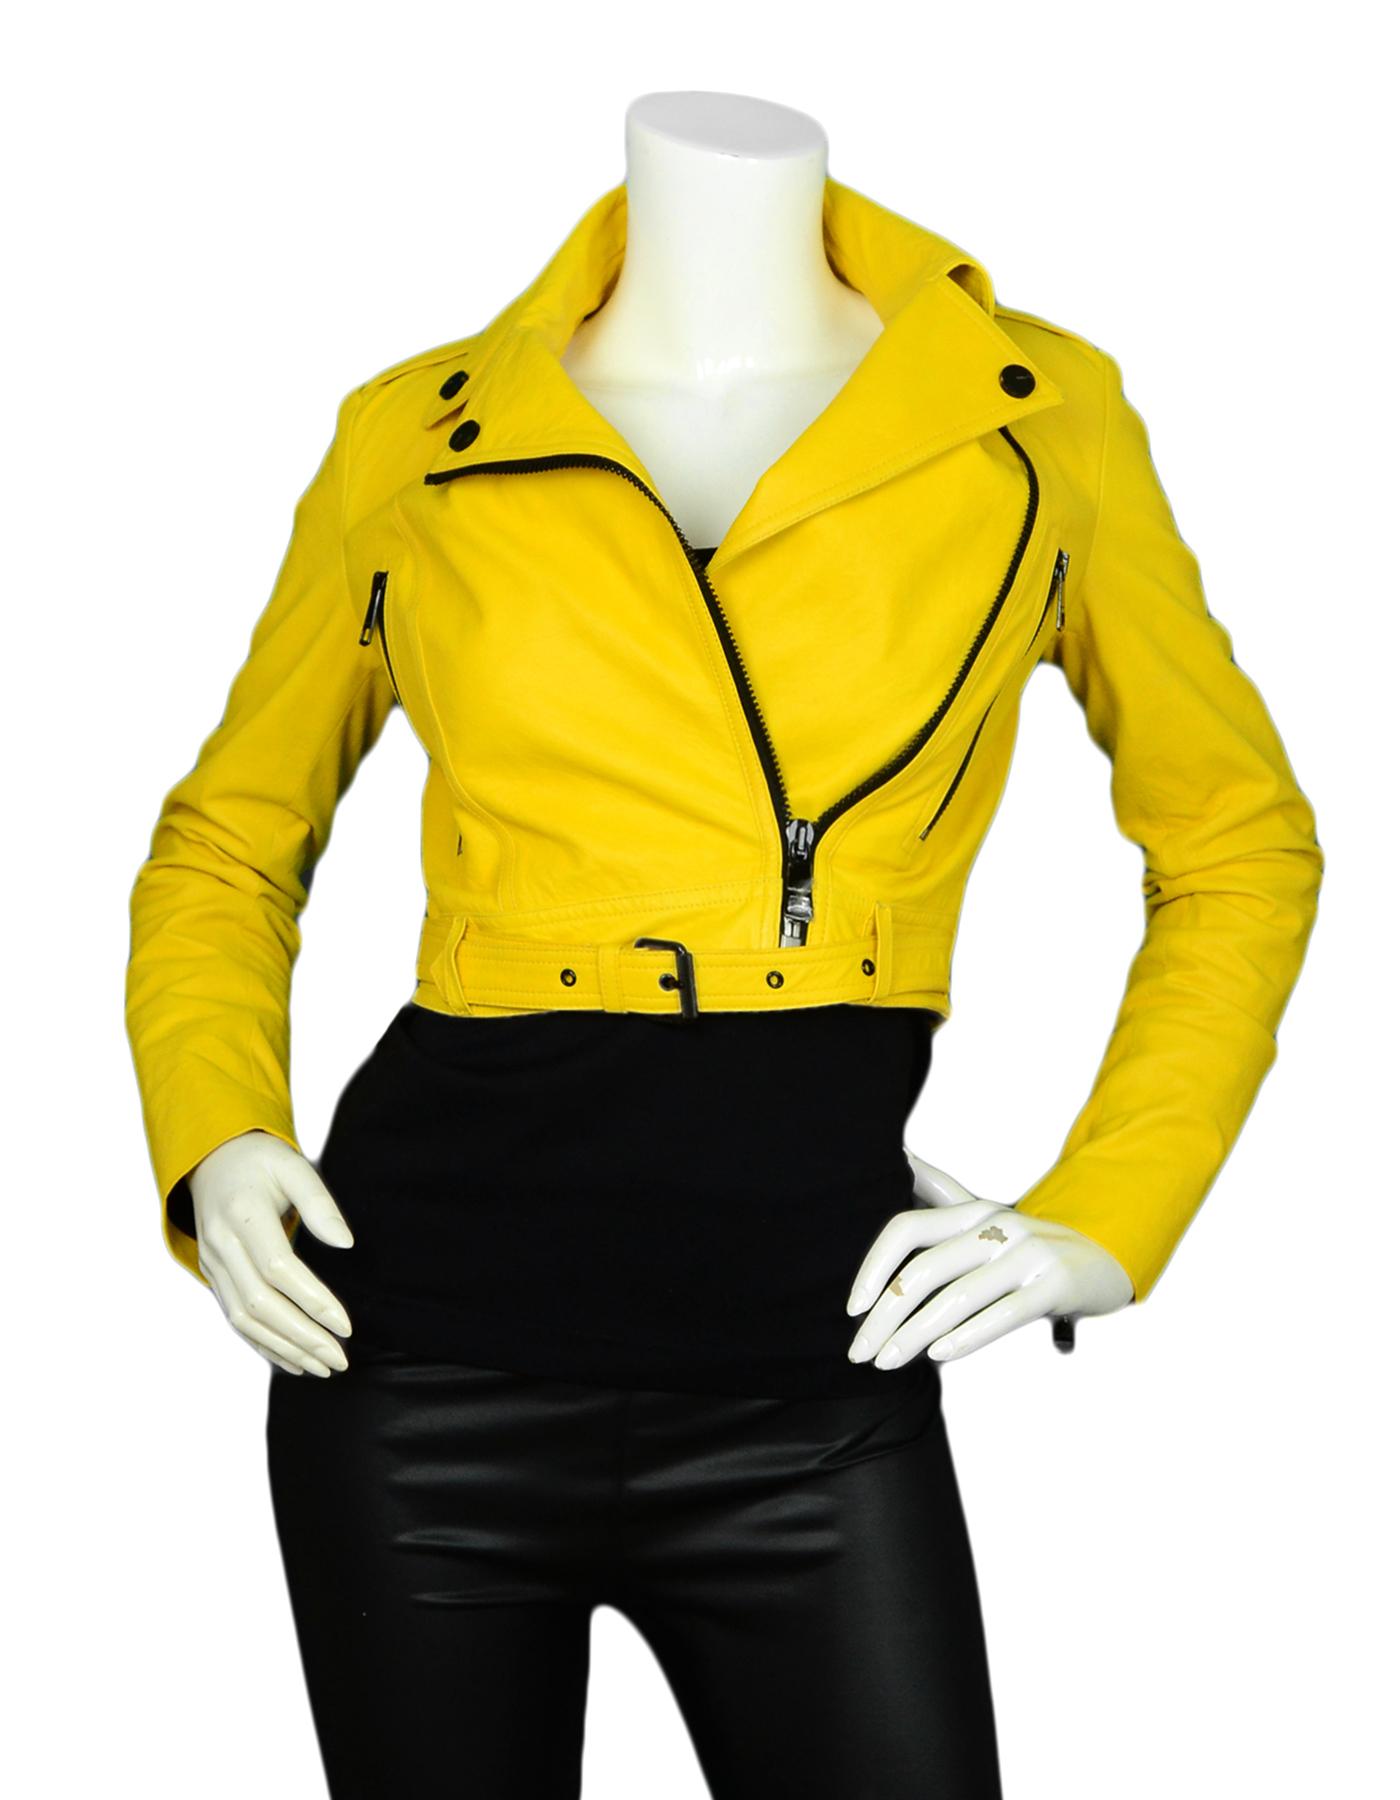 Burberry London Yellow Moto Jacket with Black Zippers sz 2

Made In: Tunisia
Color: Yellow
Materials: 100% Lambskin
Lining: 51% Viscose, 49% Acetate
Opening/Closure: Front zip
Overall Condition: Excellent pre-owned condition, with the exception of